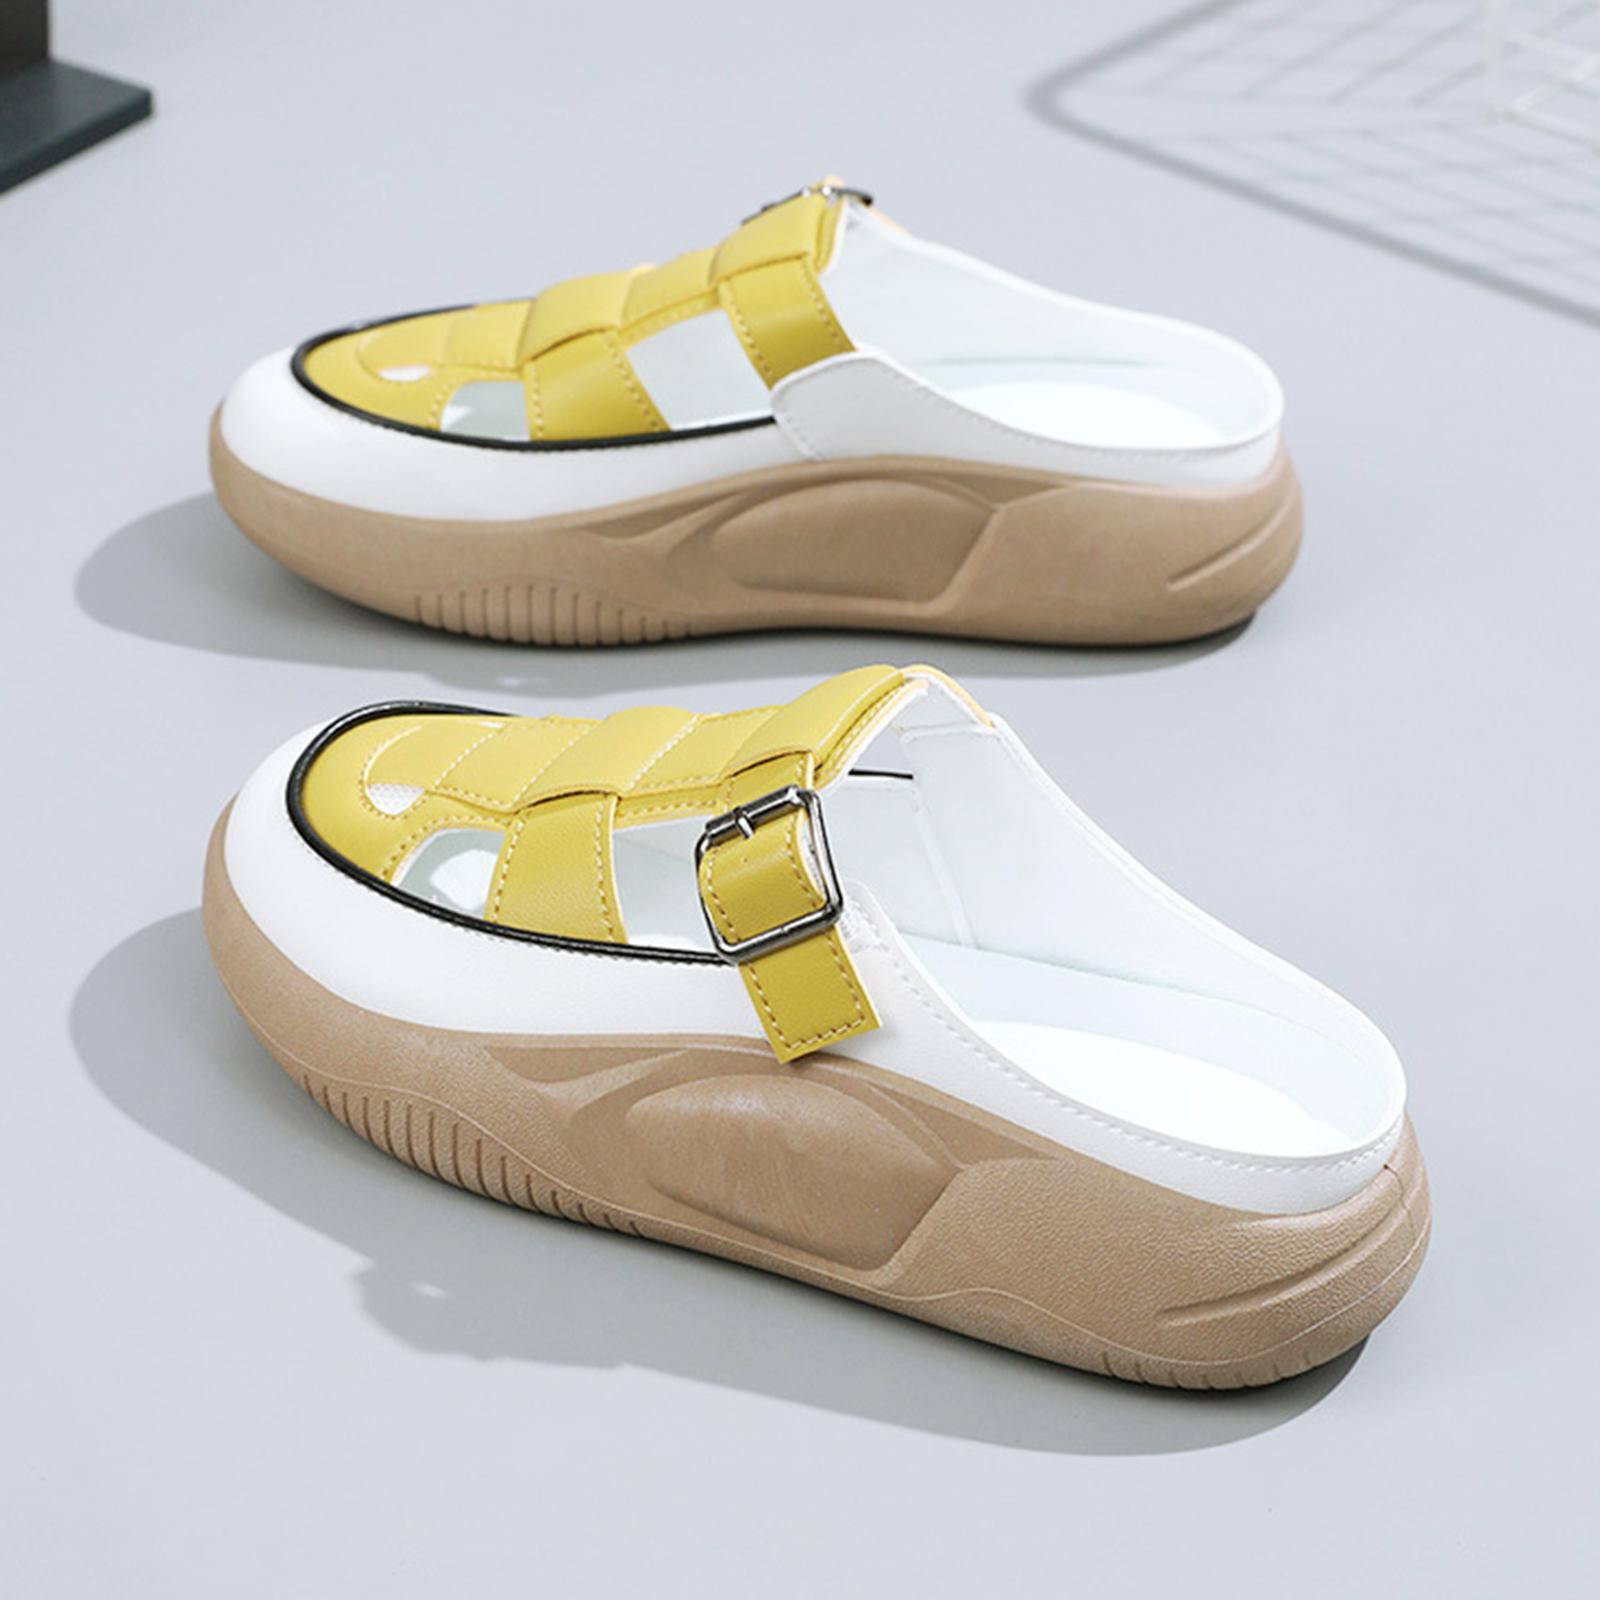 Women's Slide Sandals Comfortable Flat Shoes 5cm Thick Sole Nonslip Slippers Yellow 36